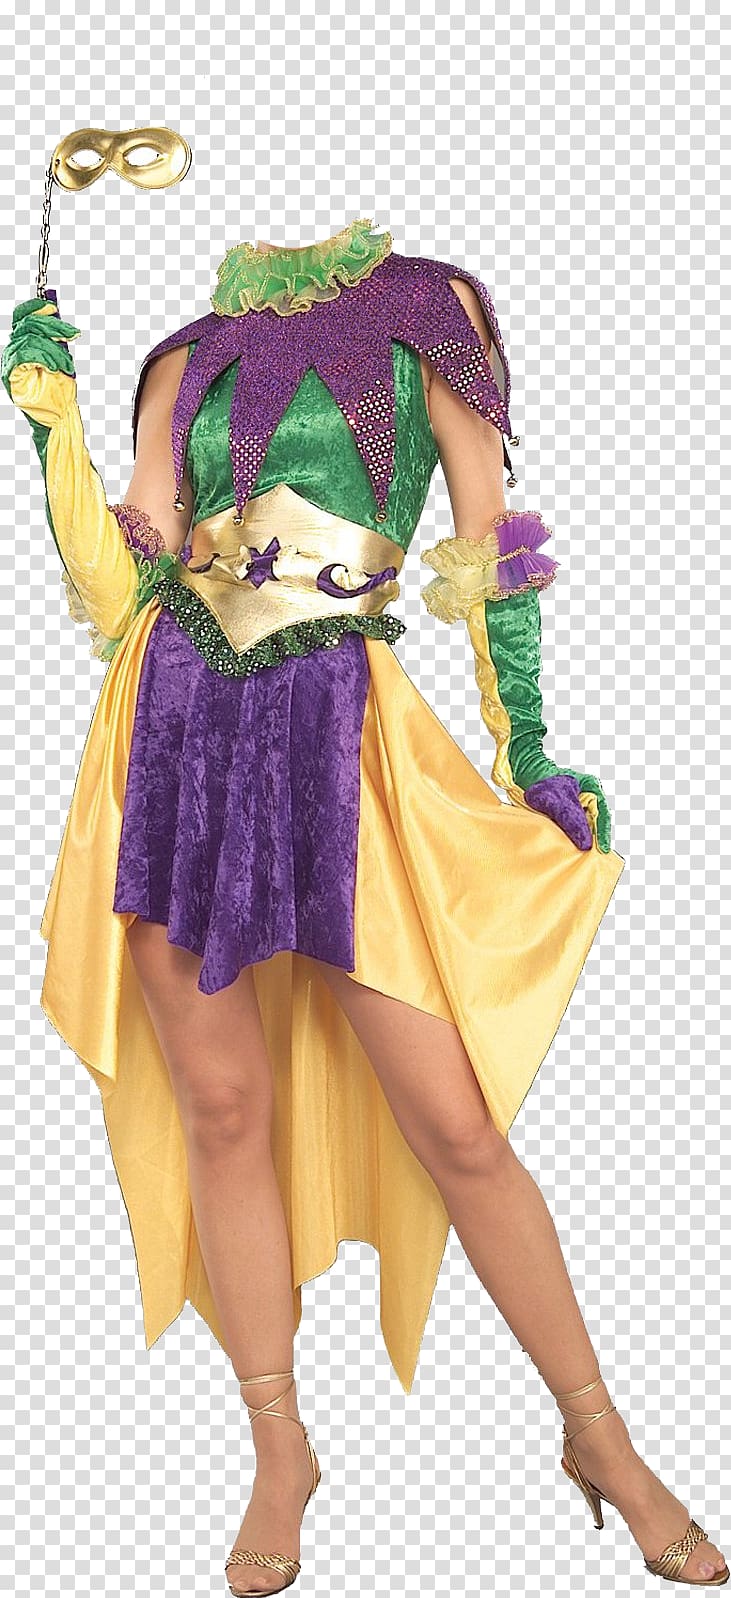 Mardi Gras in New Orleans Costume party Dress, mardi gras transparent background PNG clipart